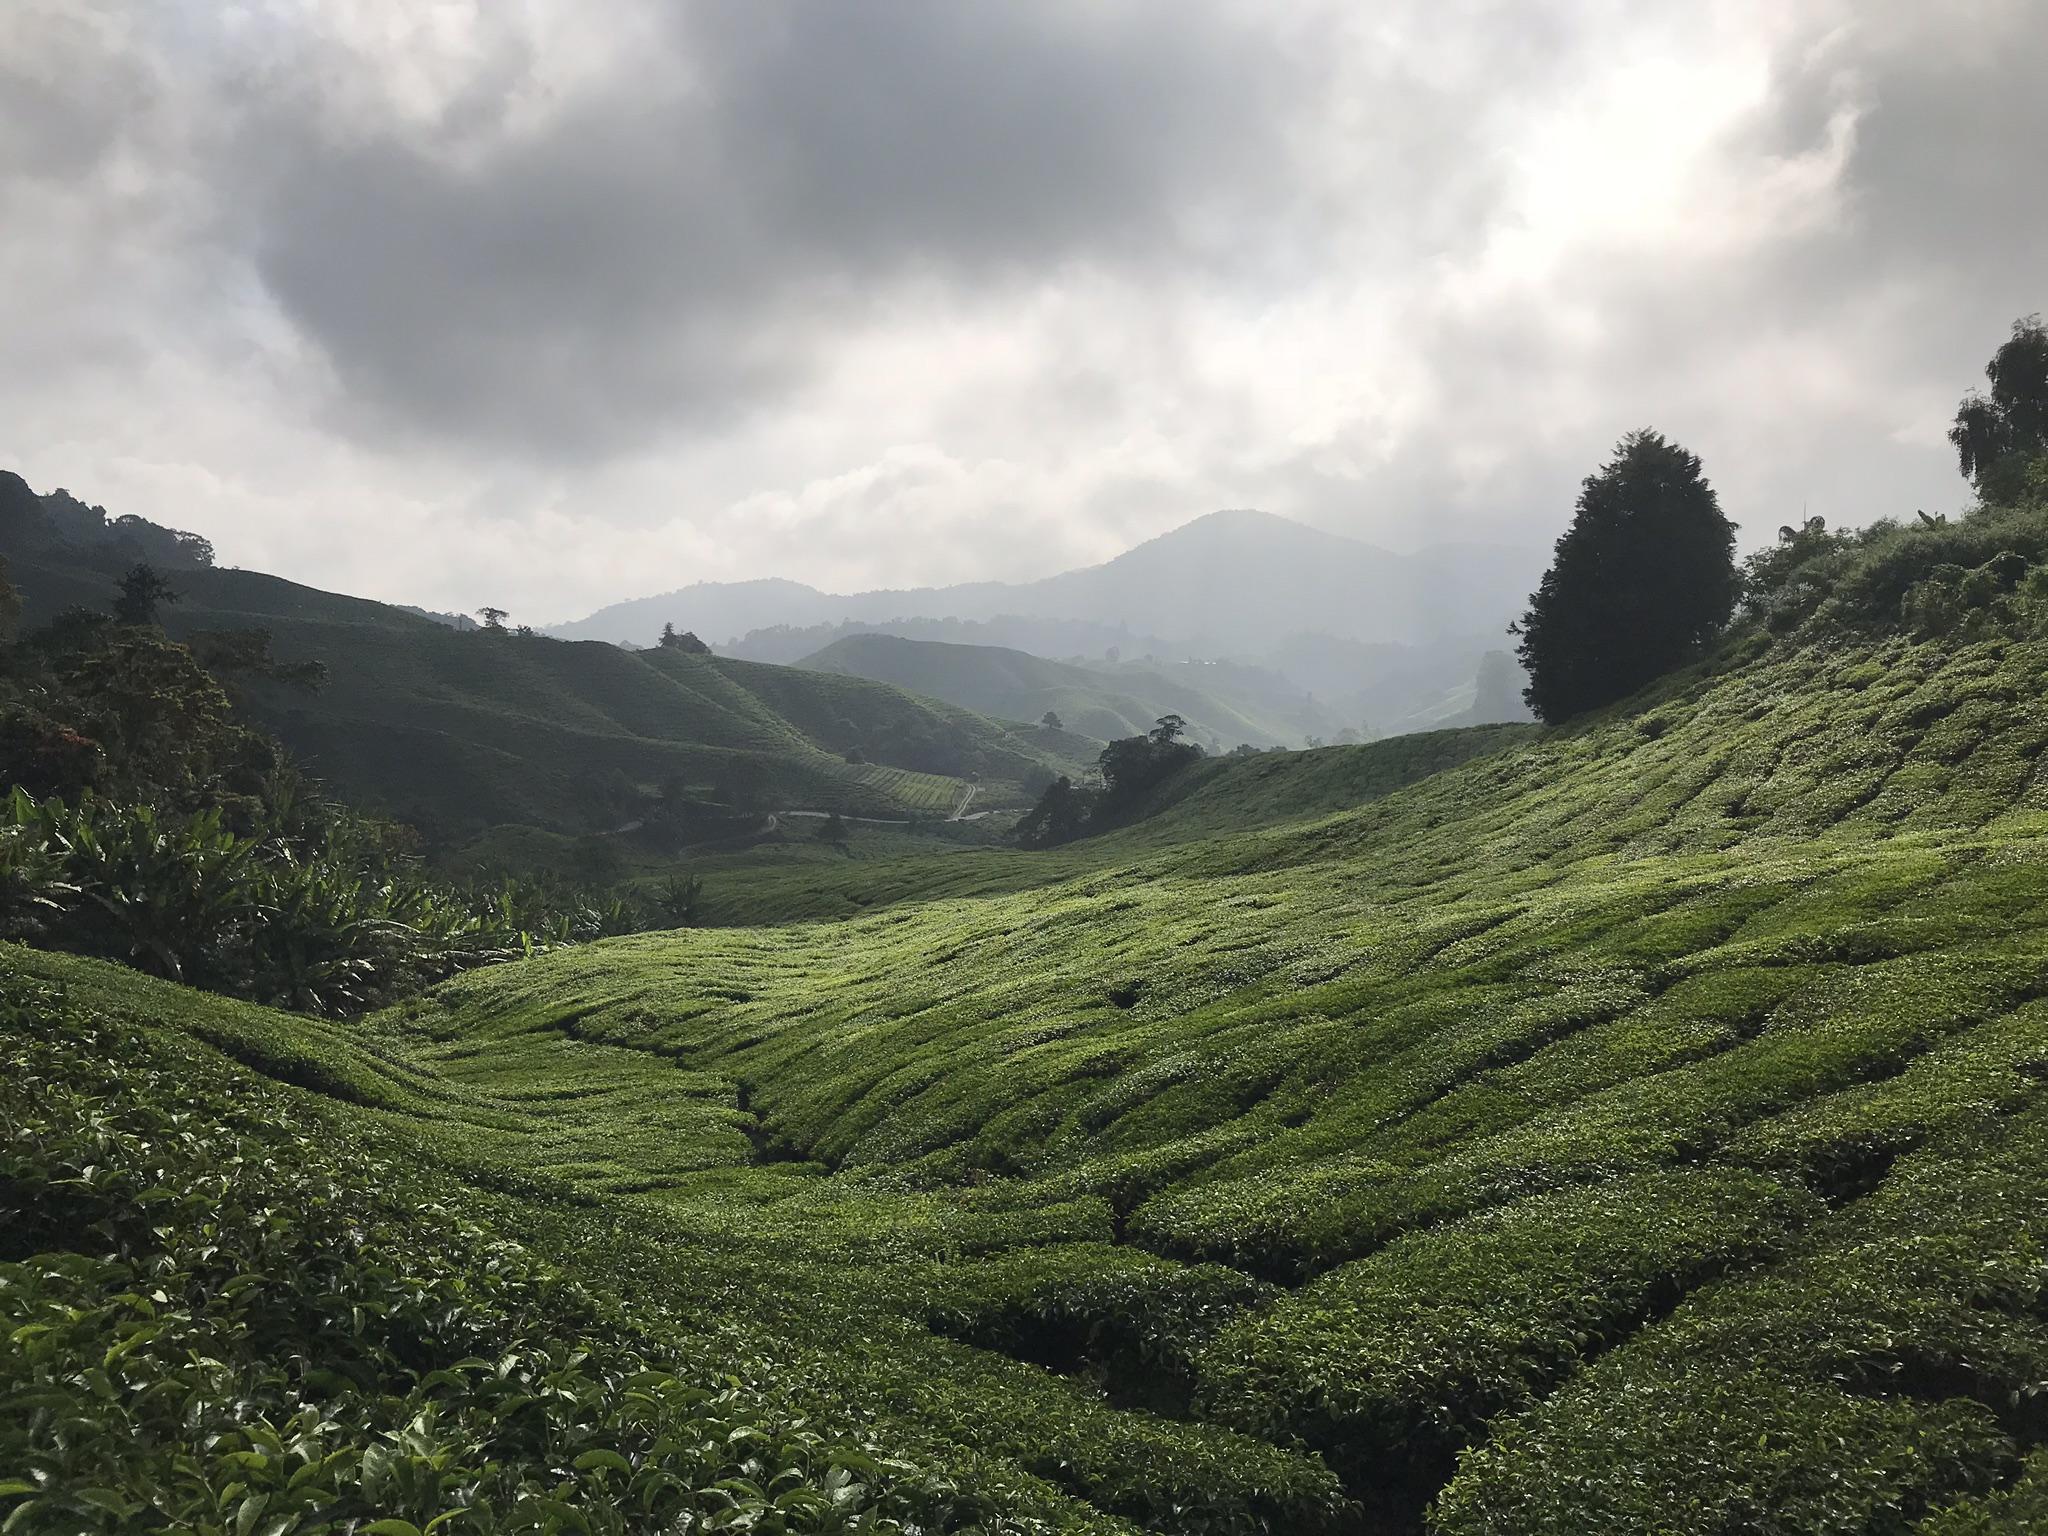 Cameron Highlands Wallpapers - Top Free Cameron Highlands Backgrounds ...